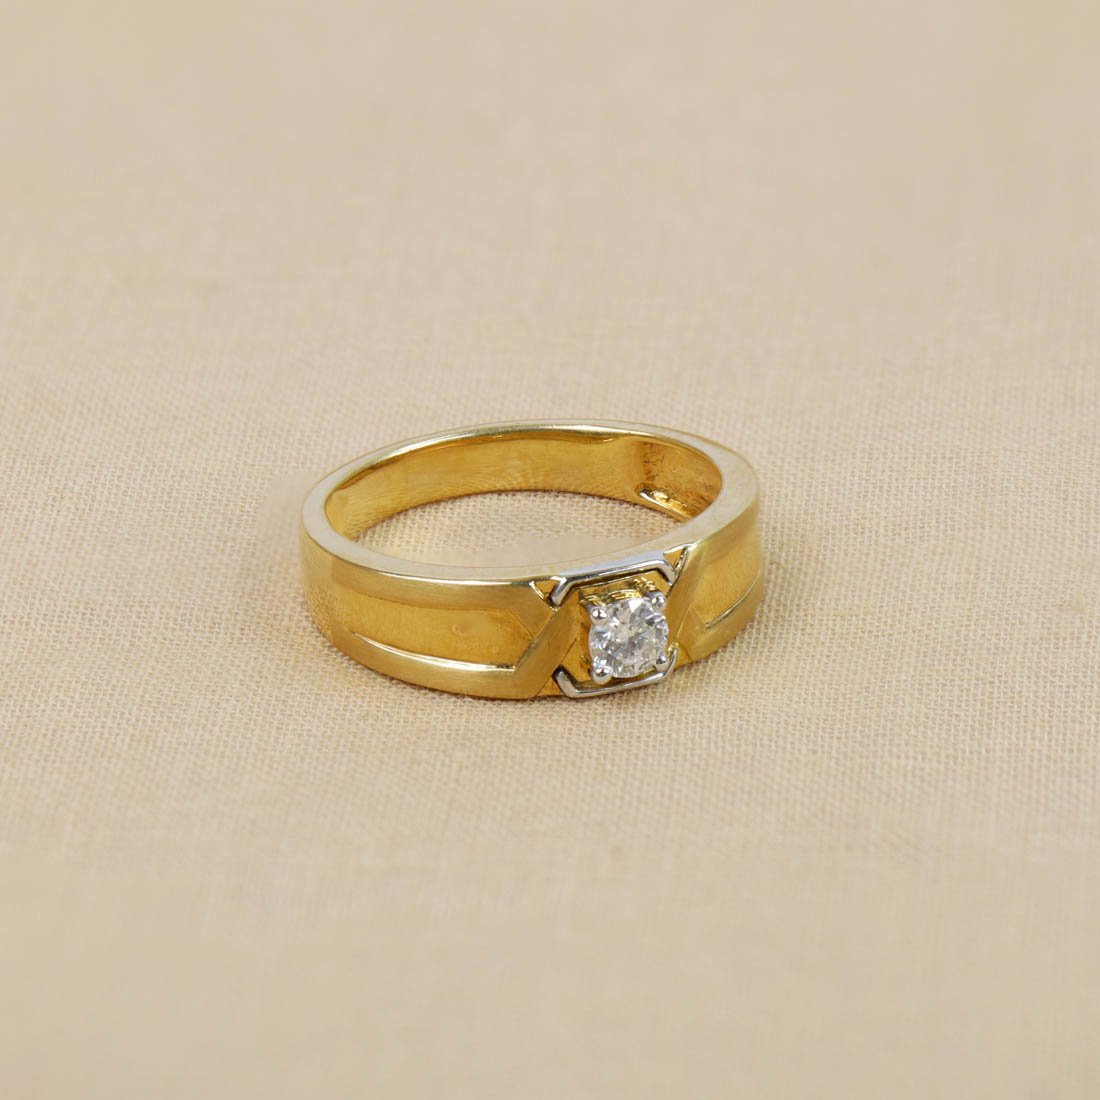 Buy quality 925 sterling silver single diamond Ring in Ahmedabad